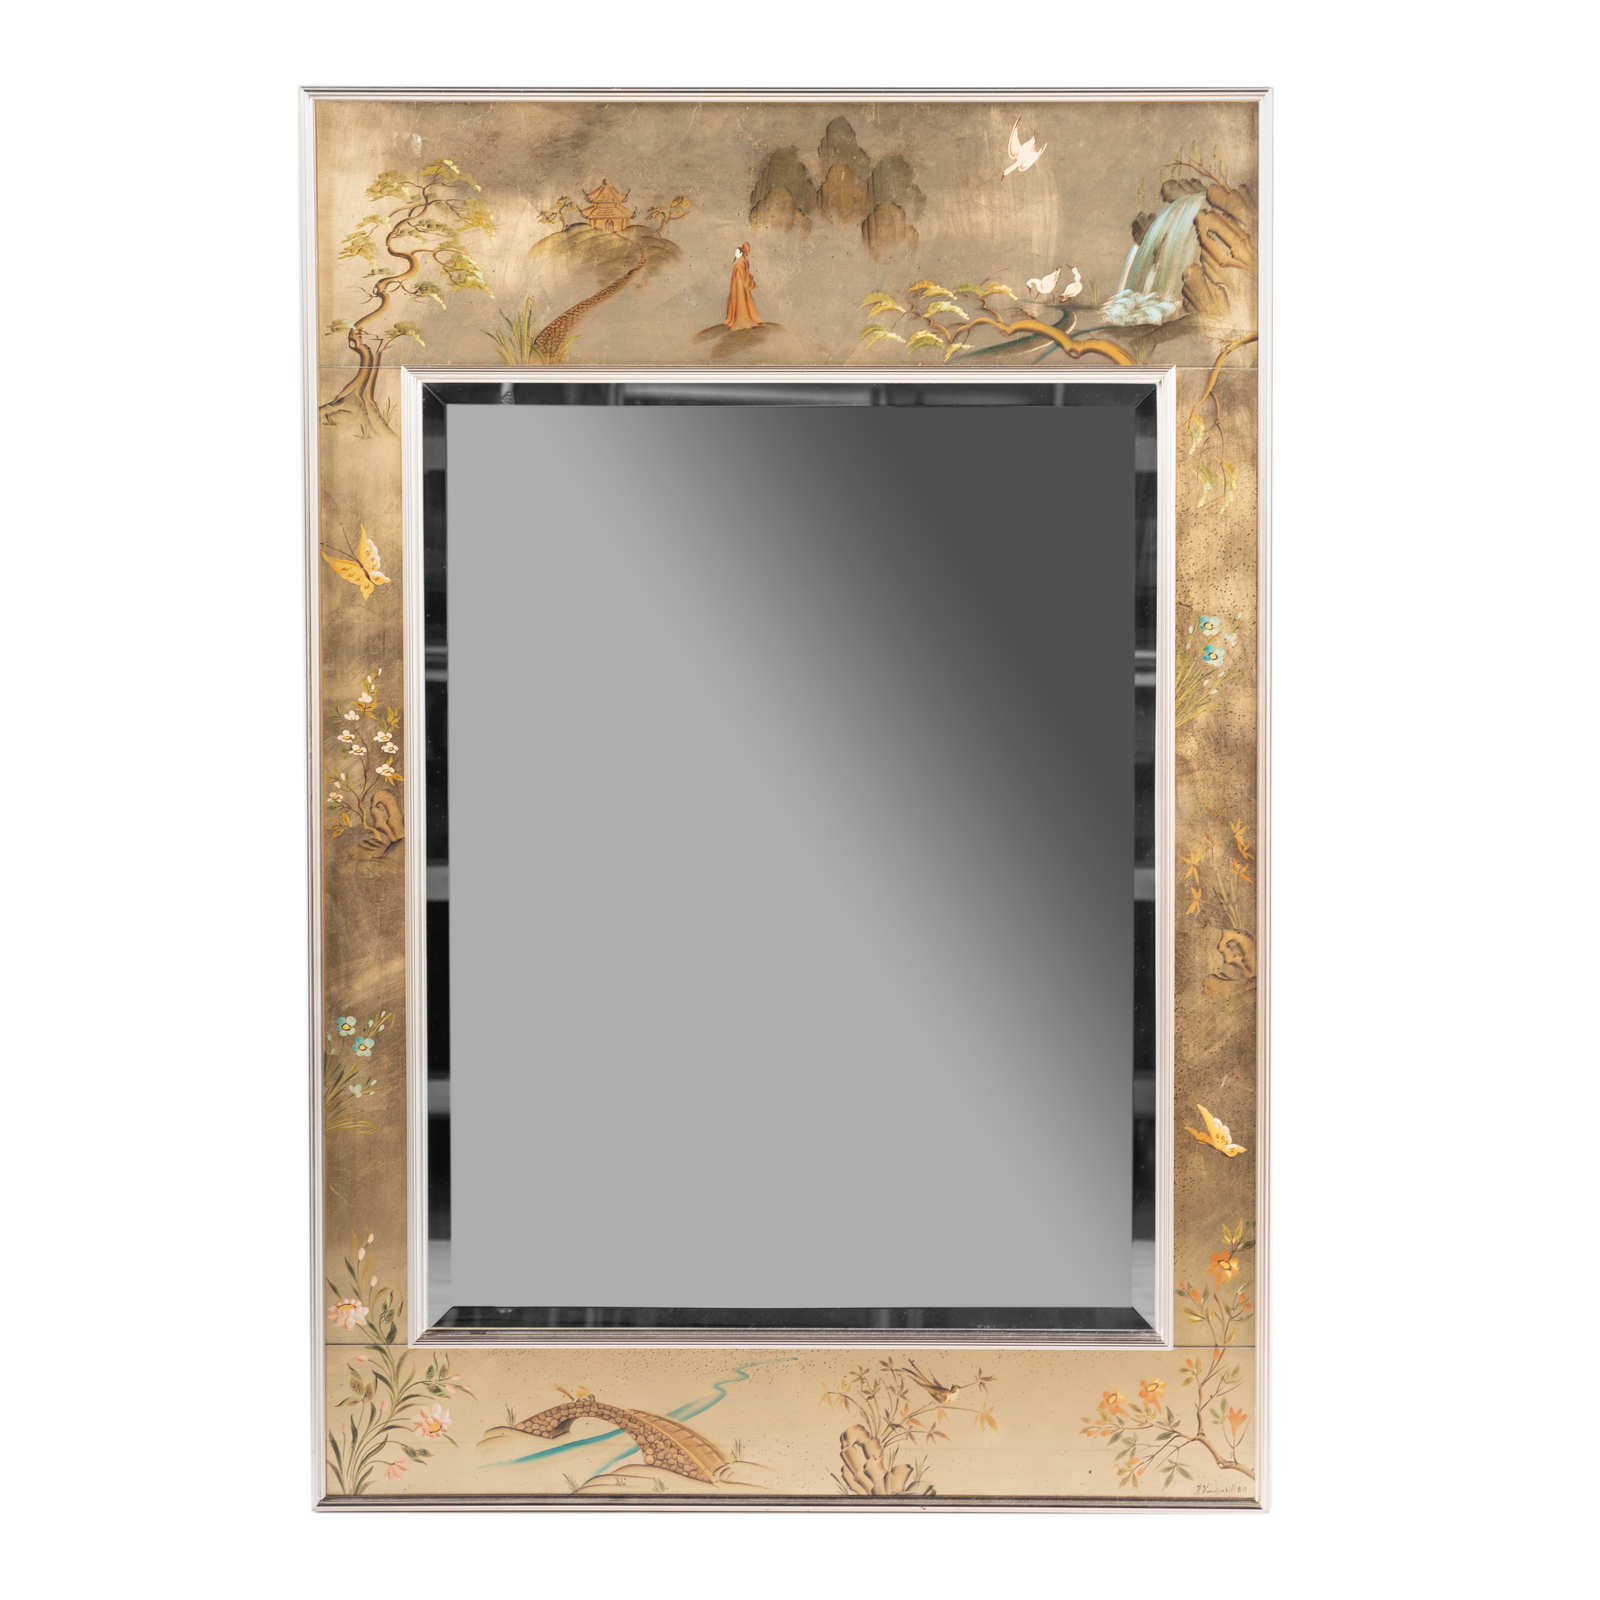 LABARGE CHINOISERIE STYLE MIRROR